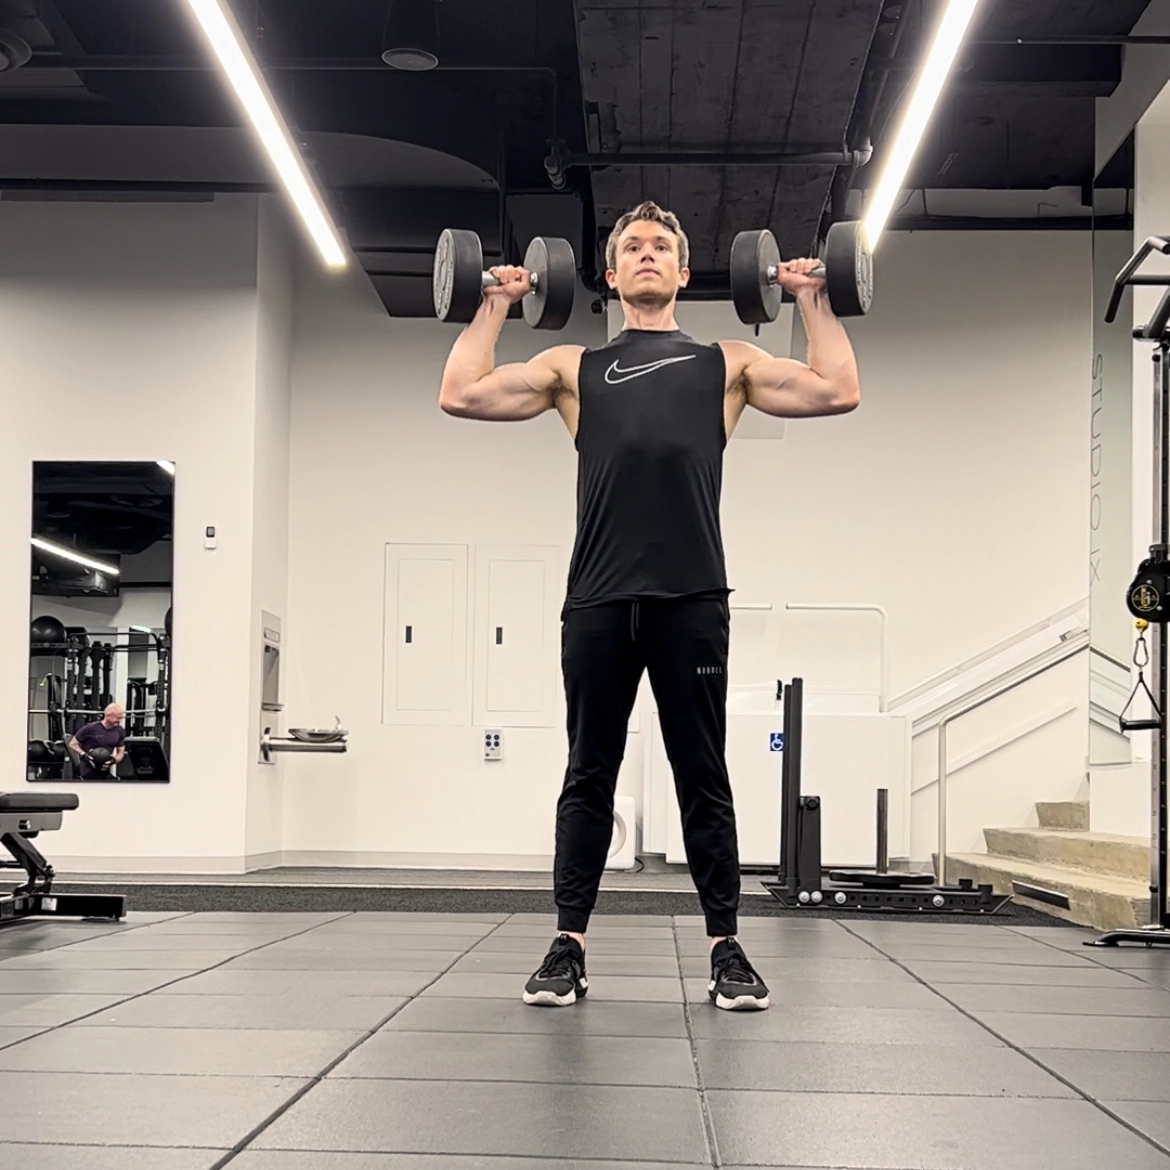 Cameron McCune does a dumbbell exercise at a workout facility. He wears black athletic pants, a black sleeveless shirt and black sneakers. He stands with his feet shoulder-width apart, bends his arms so that his elbows are out to the side and his hands are just above his shoulders, and holds a dumbbell in each hand.